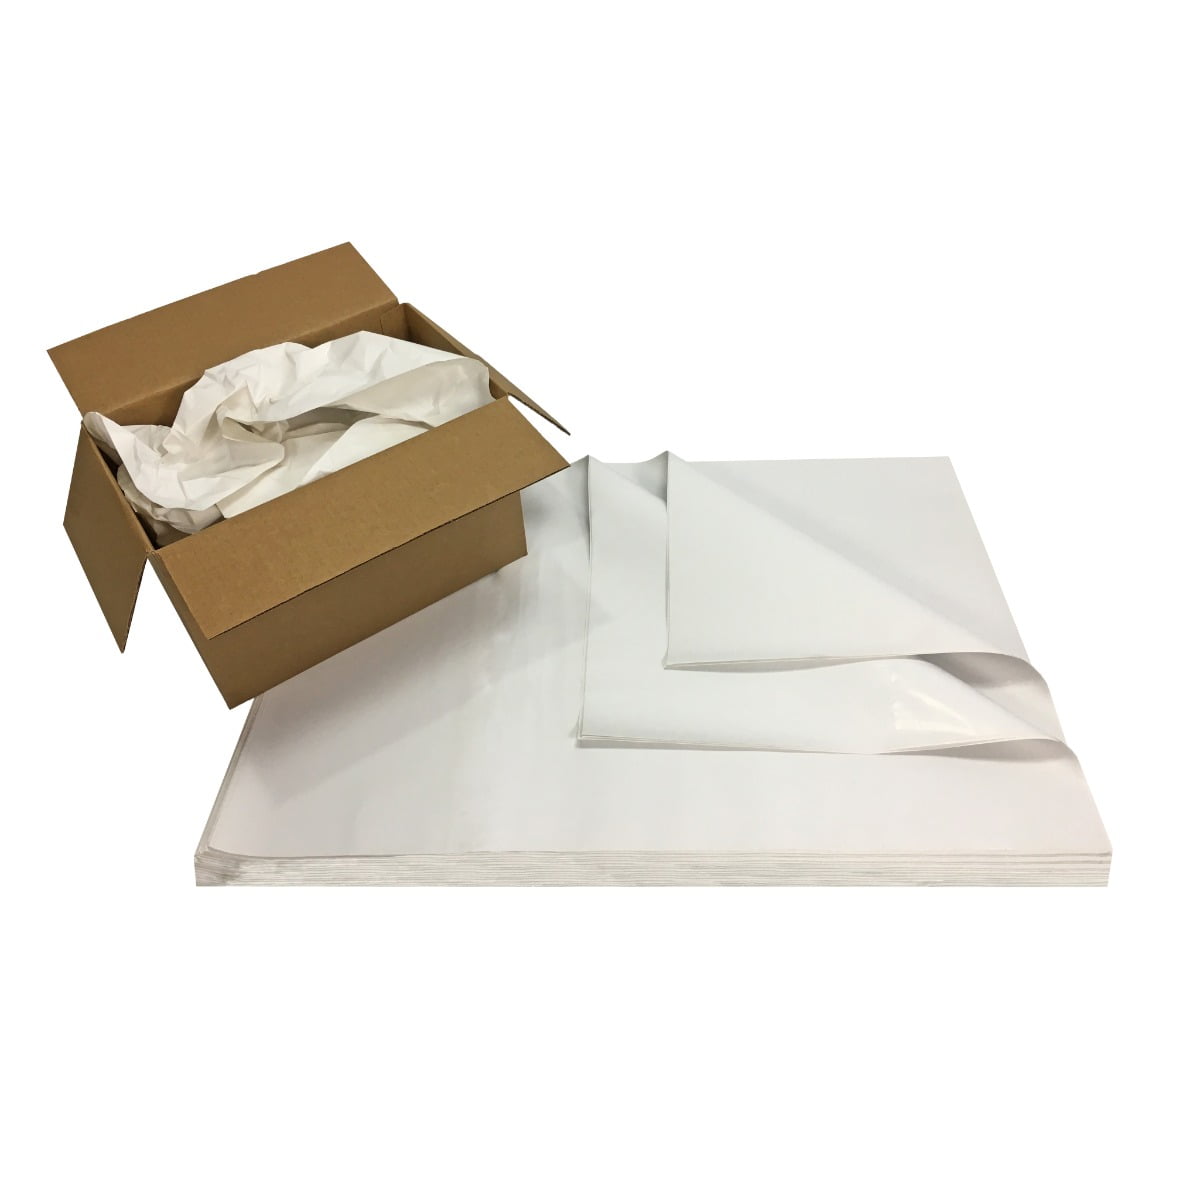 Packing Paper 500 Sheets – AIMS Self Storage & Moving Center